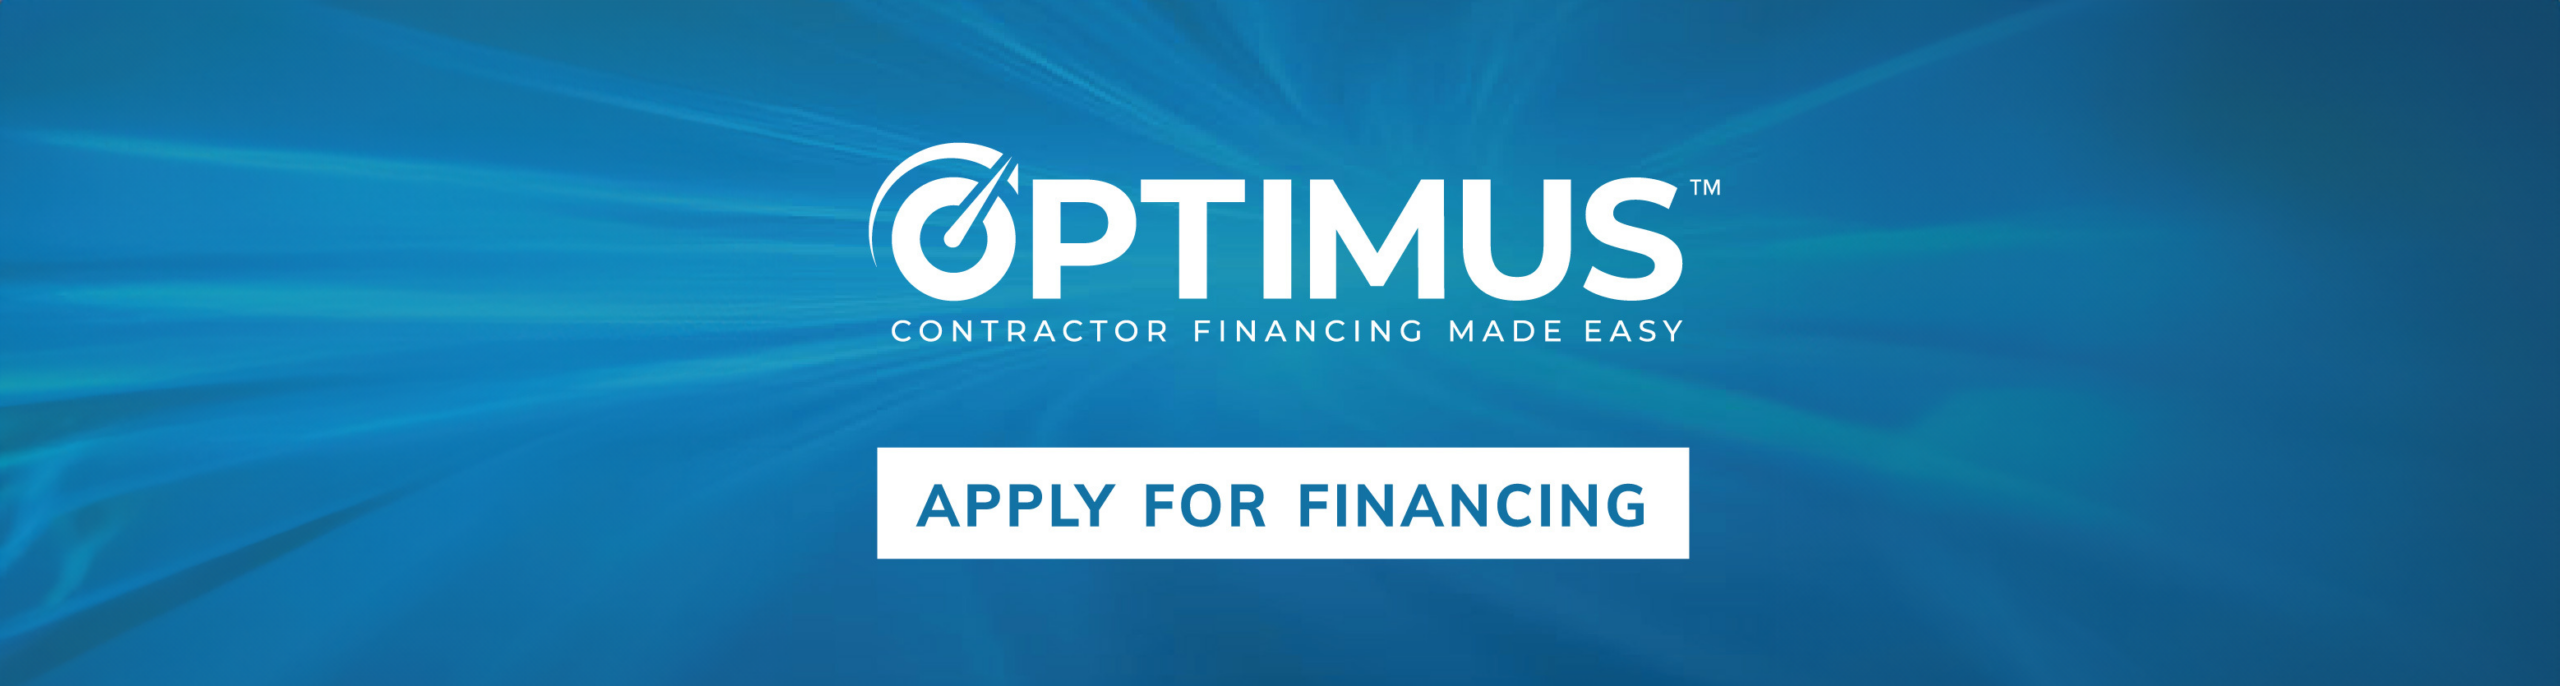 Optimus, contractor financing made easy with an apply now button